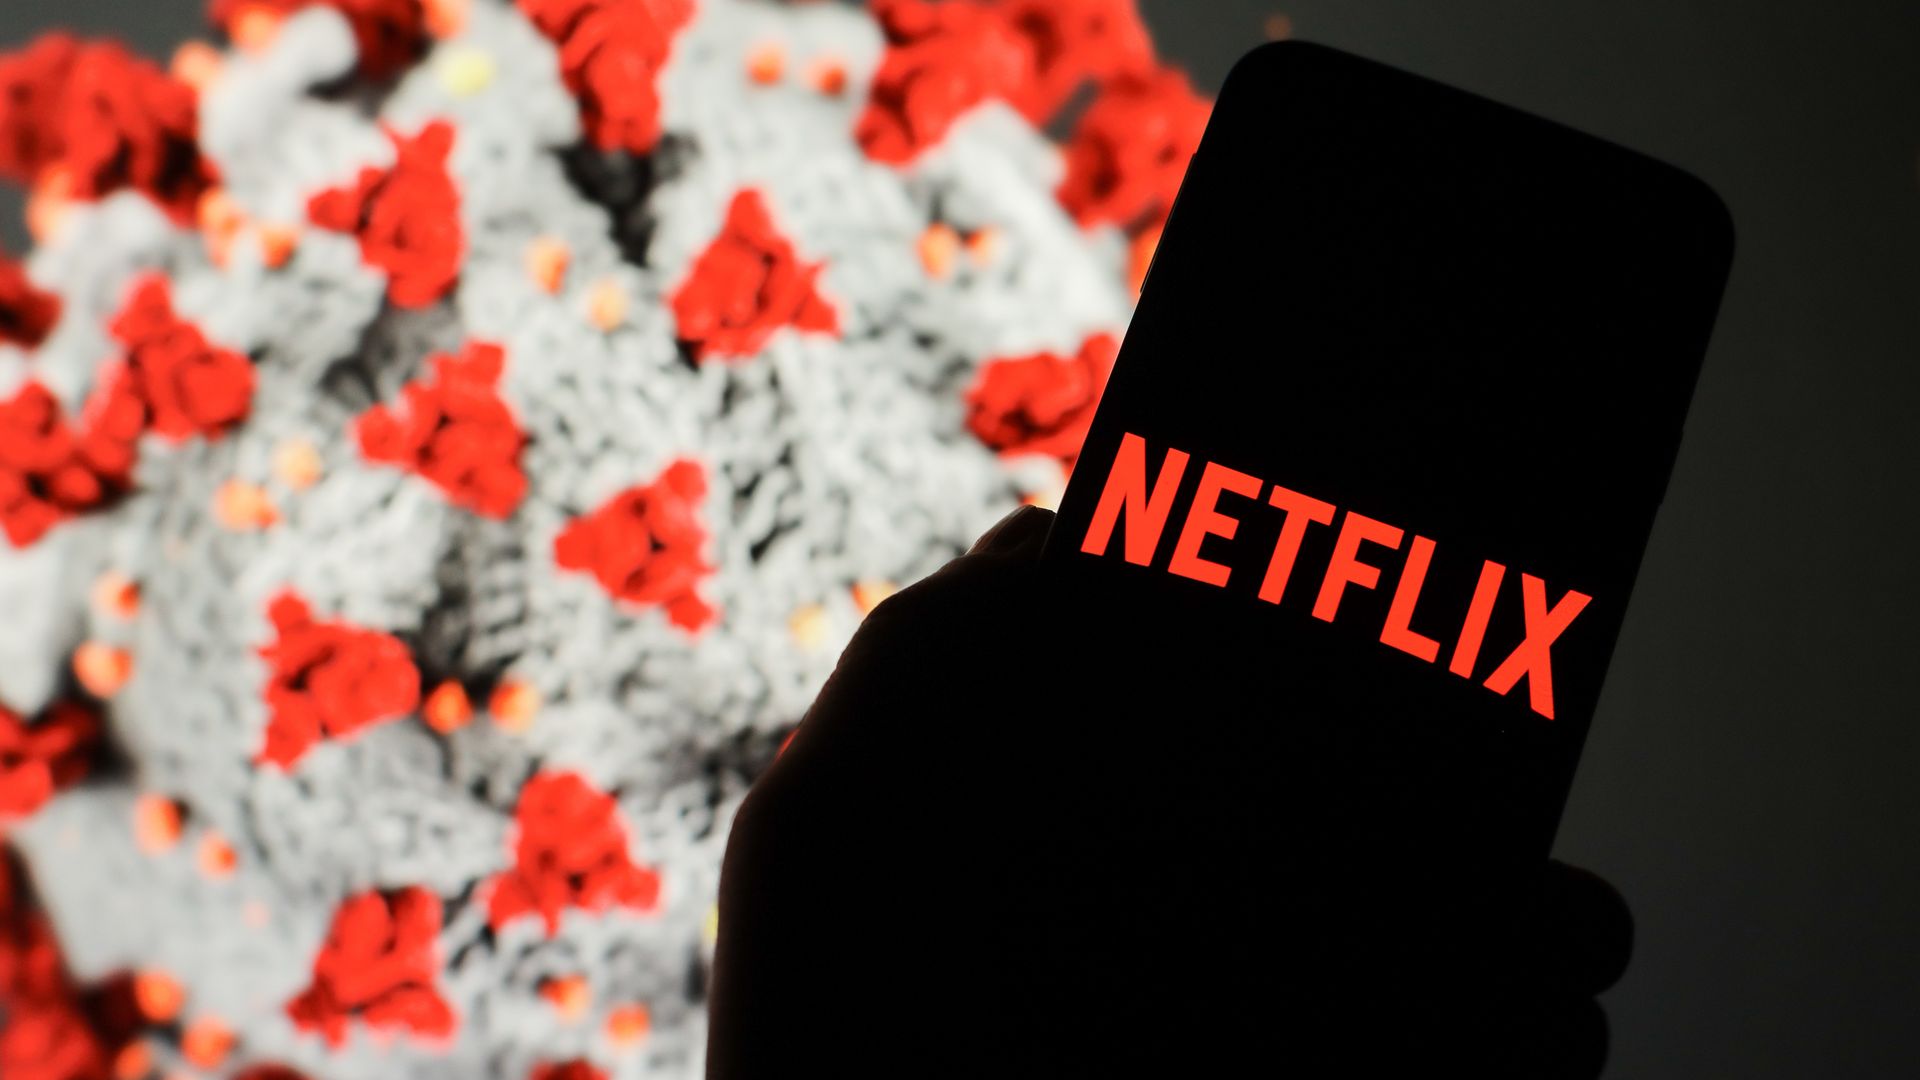 Illustration a Netflix logo seen displayed on a smartphone with computer model of the COVID-19 coronavirus in the background